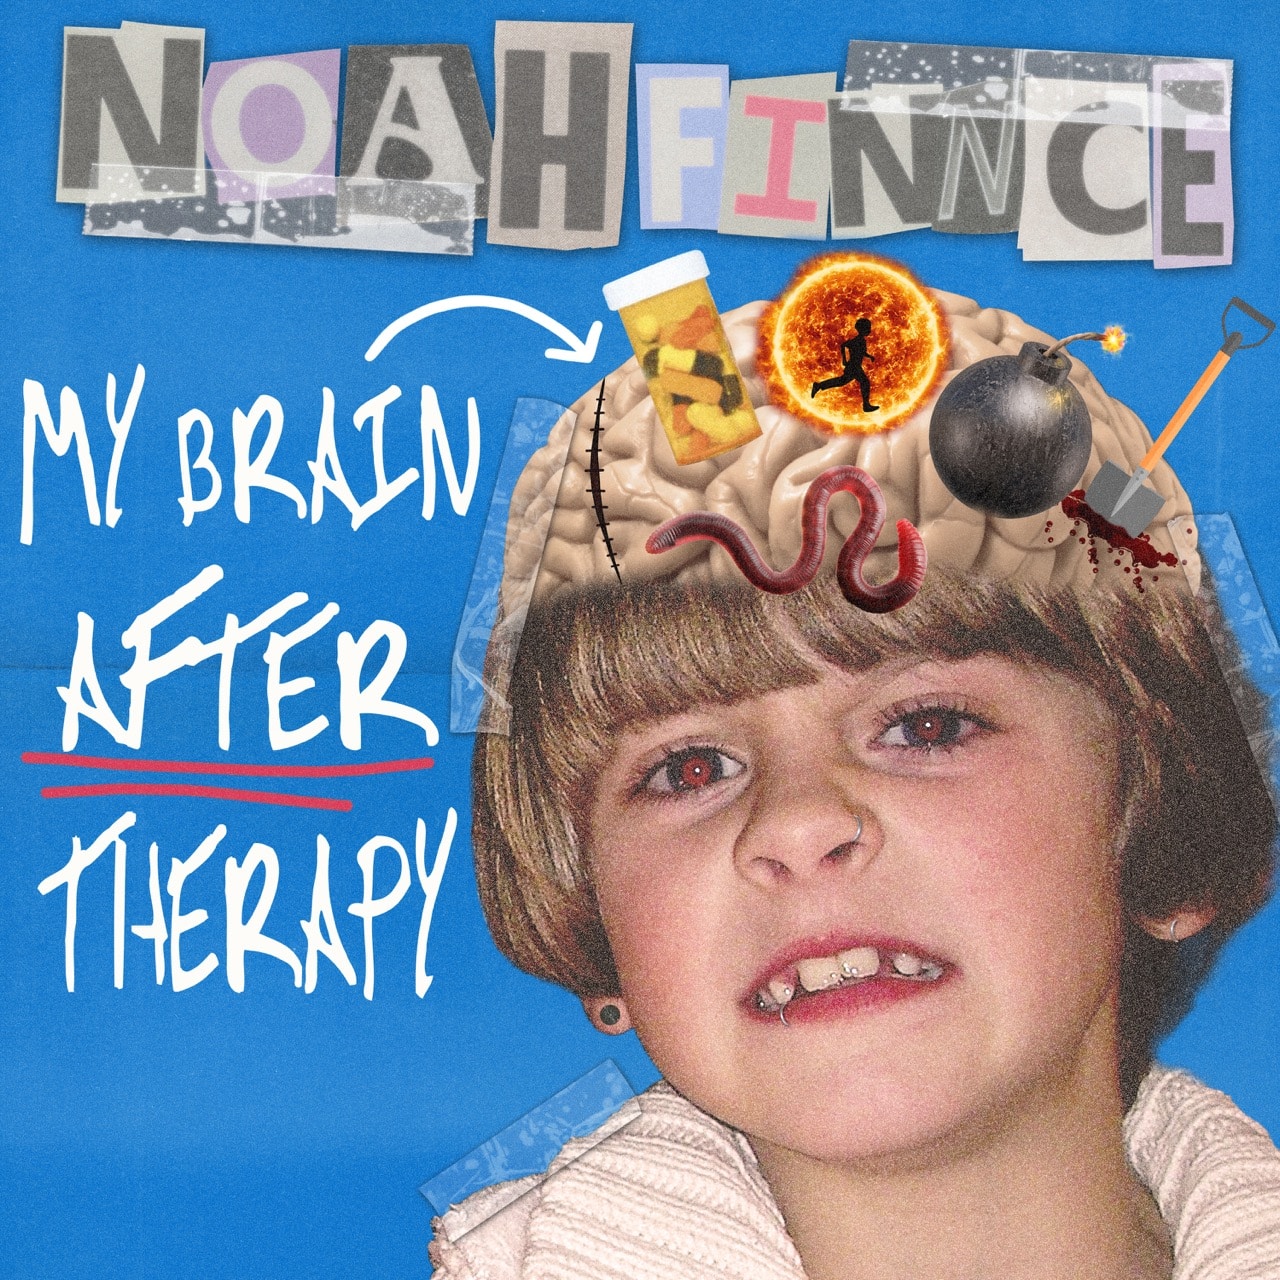 NOAHFINNCE - STUFF FROM MY BRAIN / MY BRAIN AFTER THERAPY